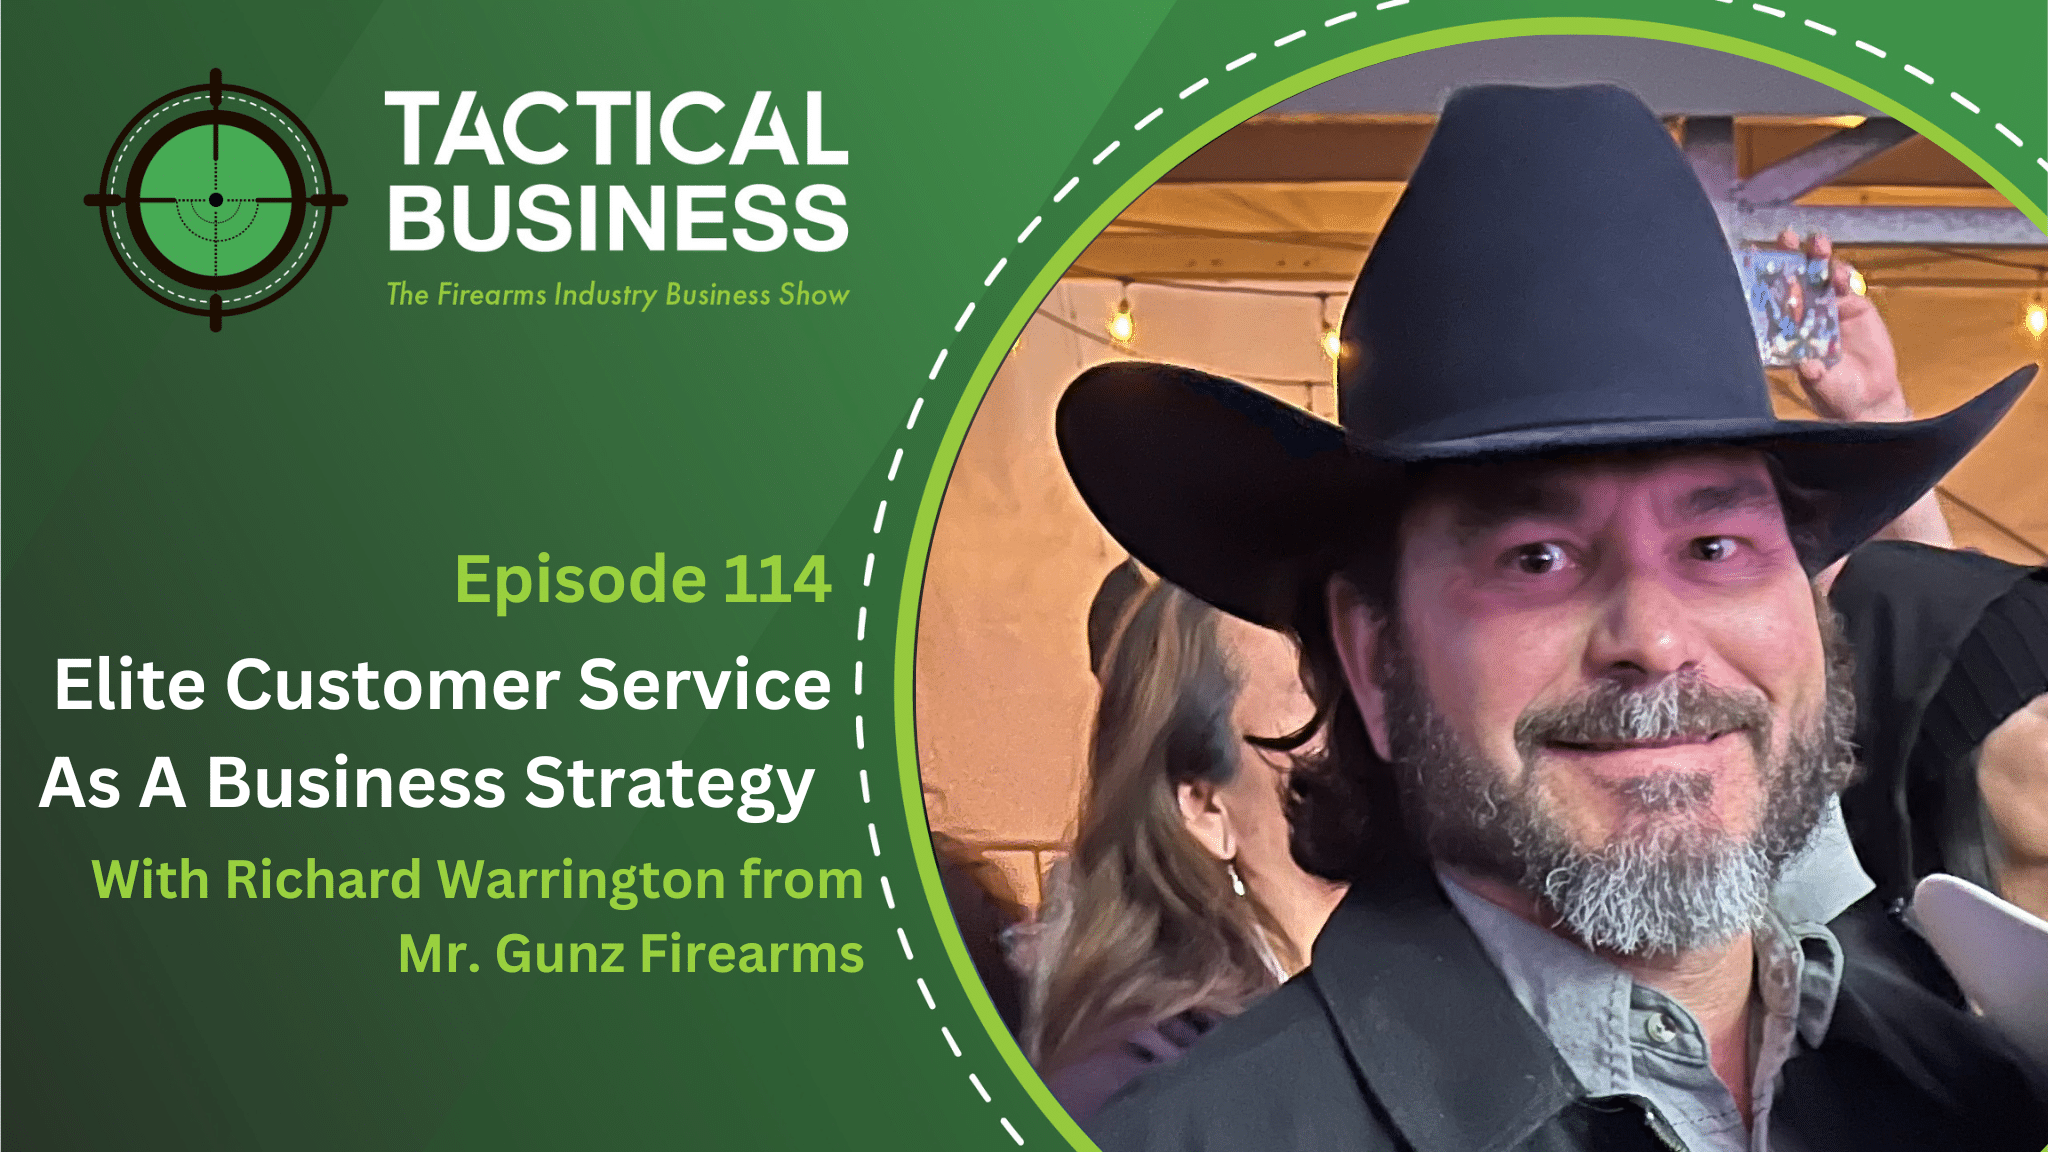 Elite Customer Service As A Business Strategy With Richard Warrington from Mr. Gunz Firearms